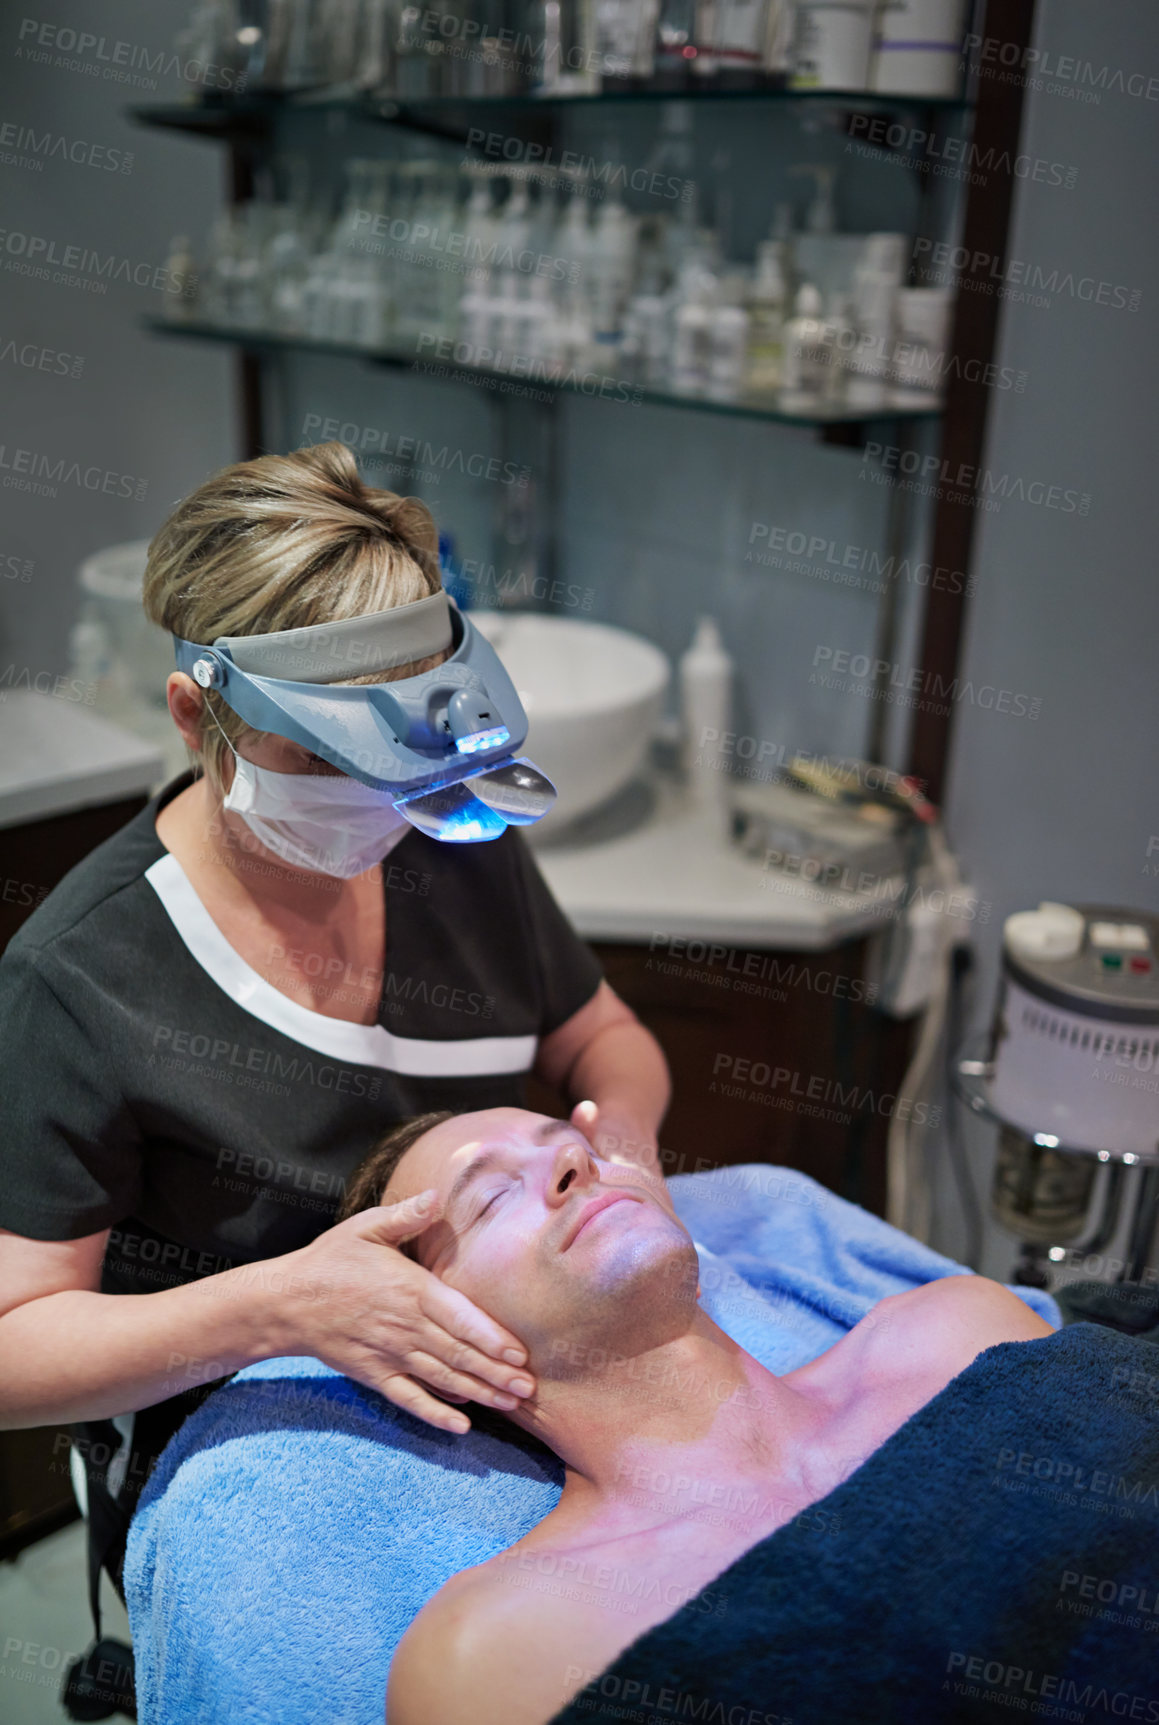 Buy stock photo Shot of a man getting a facial treatment at a beauty clinic